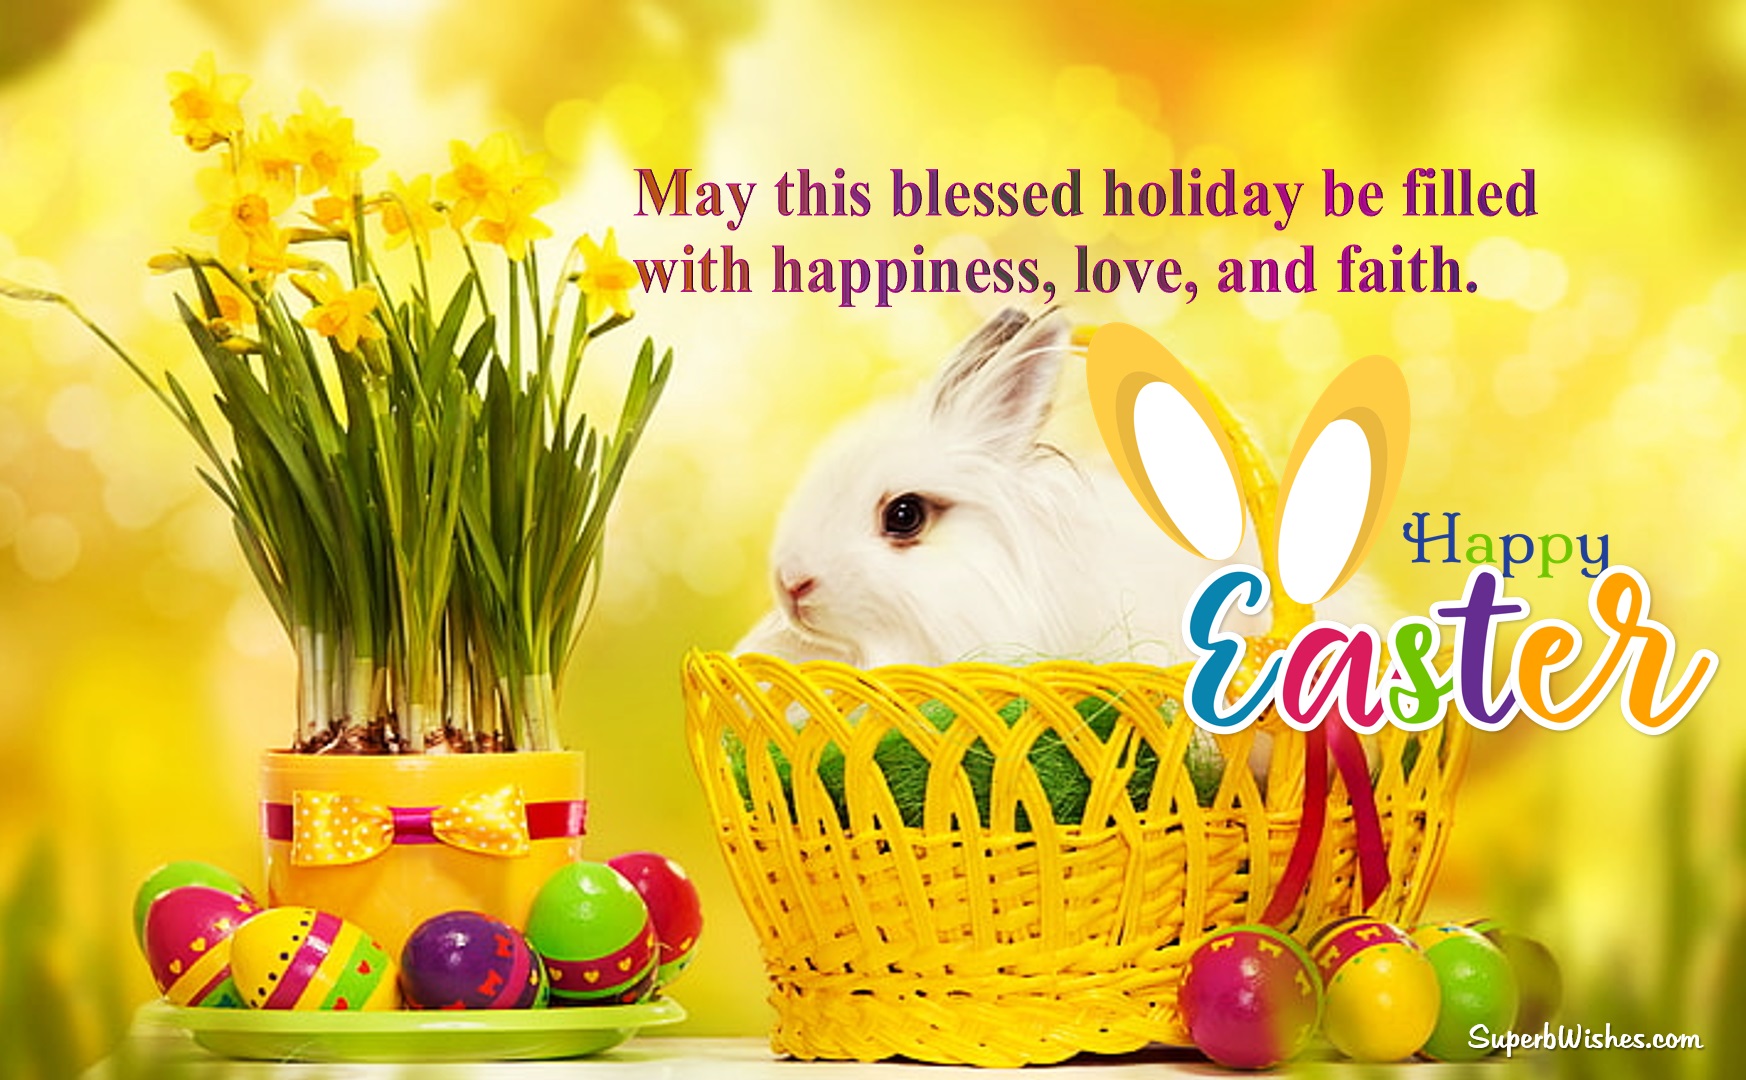 Downloadable Happy Easter Images by SuperbWishes